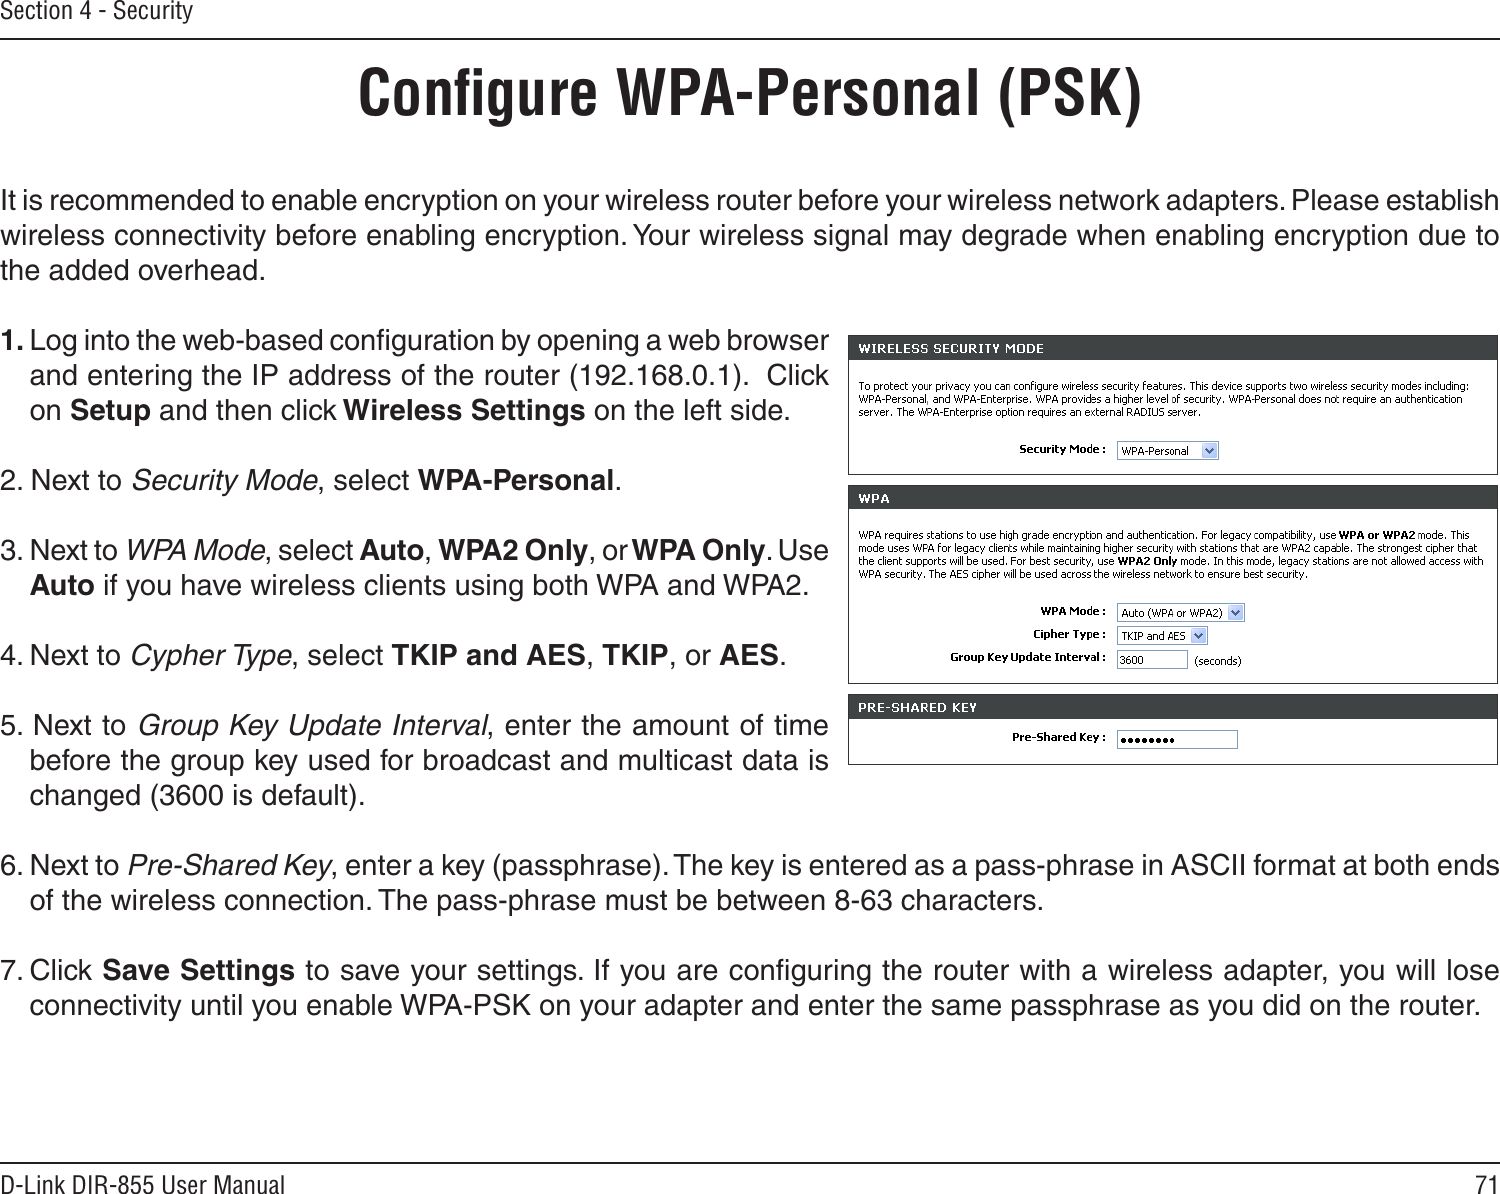 71D-Link DIR-855 User ManualSection 4 - SecurityConﬁgure WPA-Personal (PSK)It is recommended to enable encryption on your wireless router before your wireless network adapters. Please establish wireless connectivity before enabling encryption. Your wireless signal may degrade when enabling encryption due to the added overhead.1. Log into the web-based conﬁguration by opening a web browser and entering the IP address of the router (192.168.0.1).  Click on Setup and then click Wireless Settings on the left side.2. Next to Security Mode, select WPA-Personal.3. Next to WPA Mode, select Auto, WPA2 Only, or WPA Only. Use Auto if you have wireless clients using both WPA and WPA2.4. Next to Cypher Type, select TKIP and AES, TKIP, or AES.5. Next to Group Key Update Interval, enter the amount of time before the group key used for broadcast and multicast data is changed (3600 is default).6. Next to Pre-Shared Key, enter a key (passphrase). The key is entered as a pass-phrase in ASCII format at both ends of the wireless connection. The pass-phrase must be between 8-63 characters. 7. Click Save Settings to save your settings. If you are conﬁguring the router with a wireless adapter, you will lose connectivity until you enable WPA-PSK on your adapter and enter the same passphrase as you did on the router.